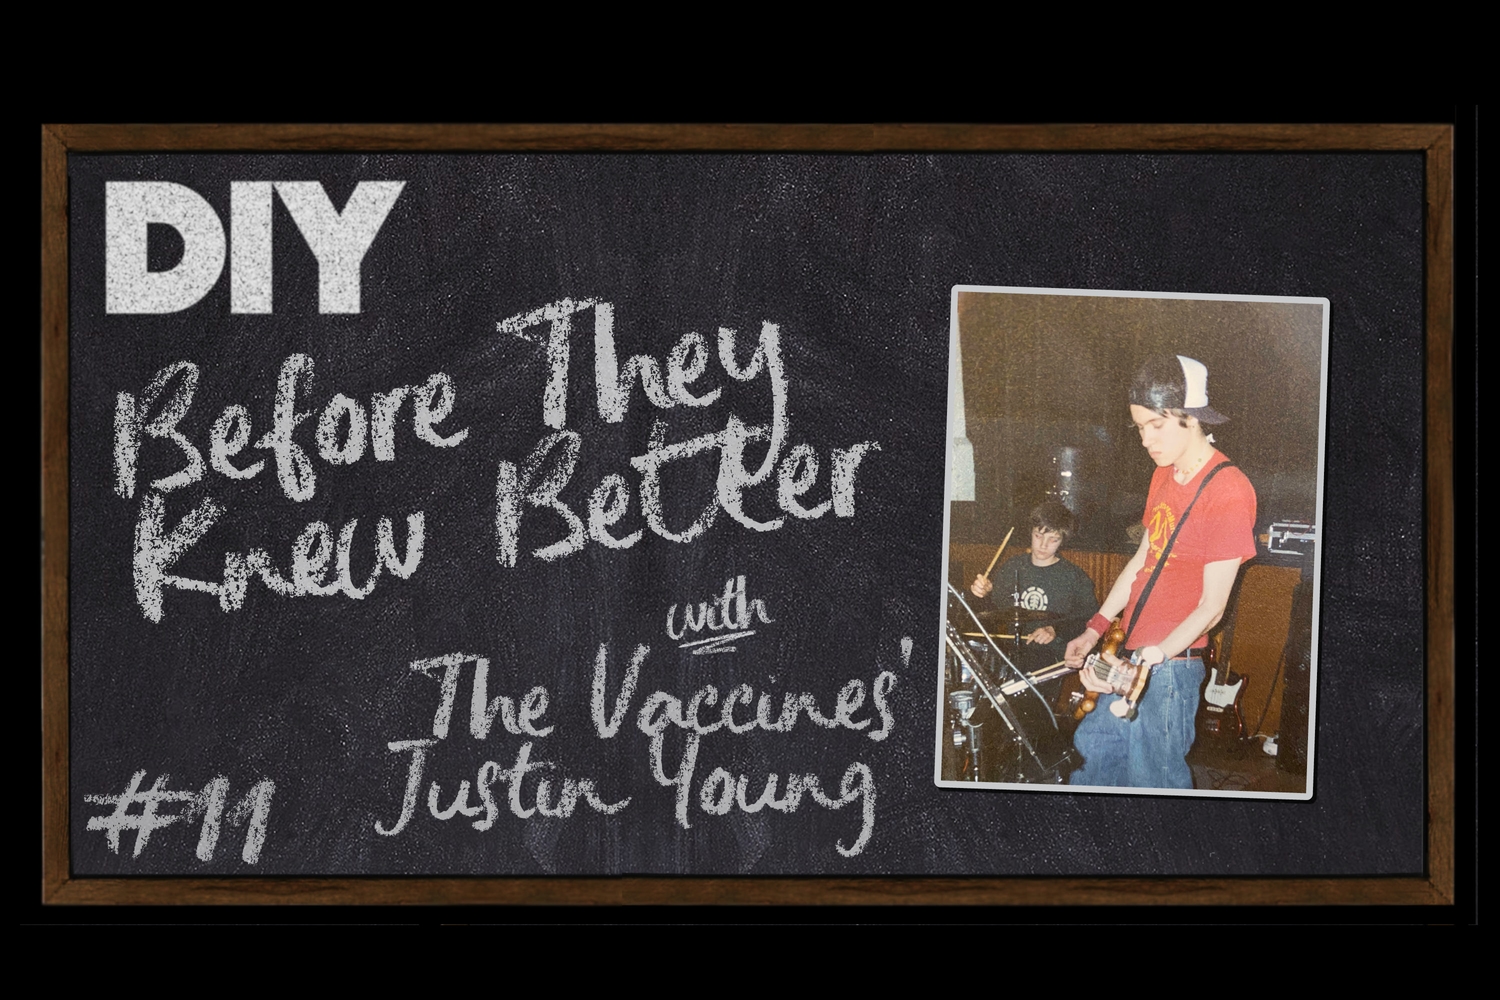 DIY’s podcast Before They Knew Better ends the year with The Vaccines’ Justin Young